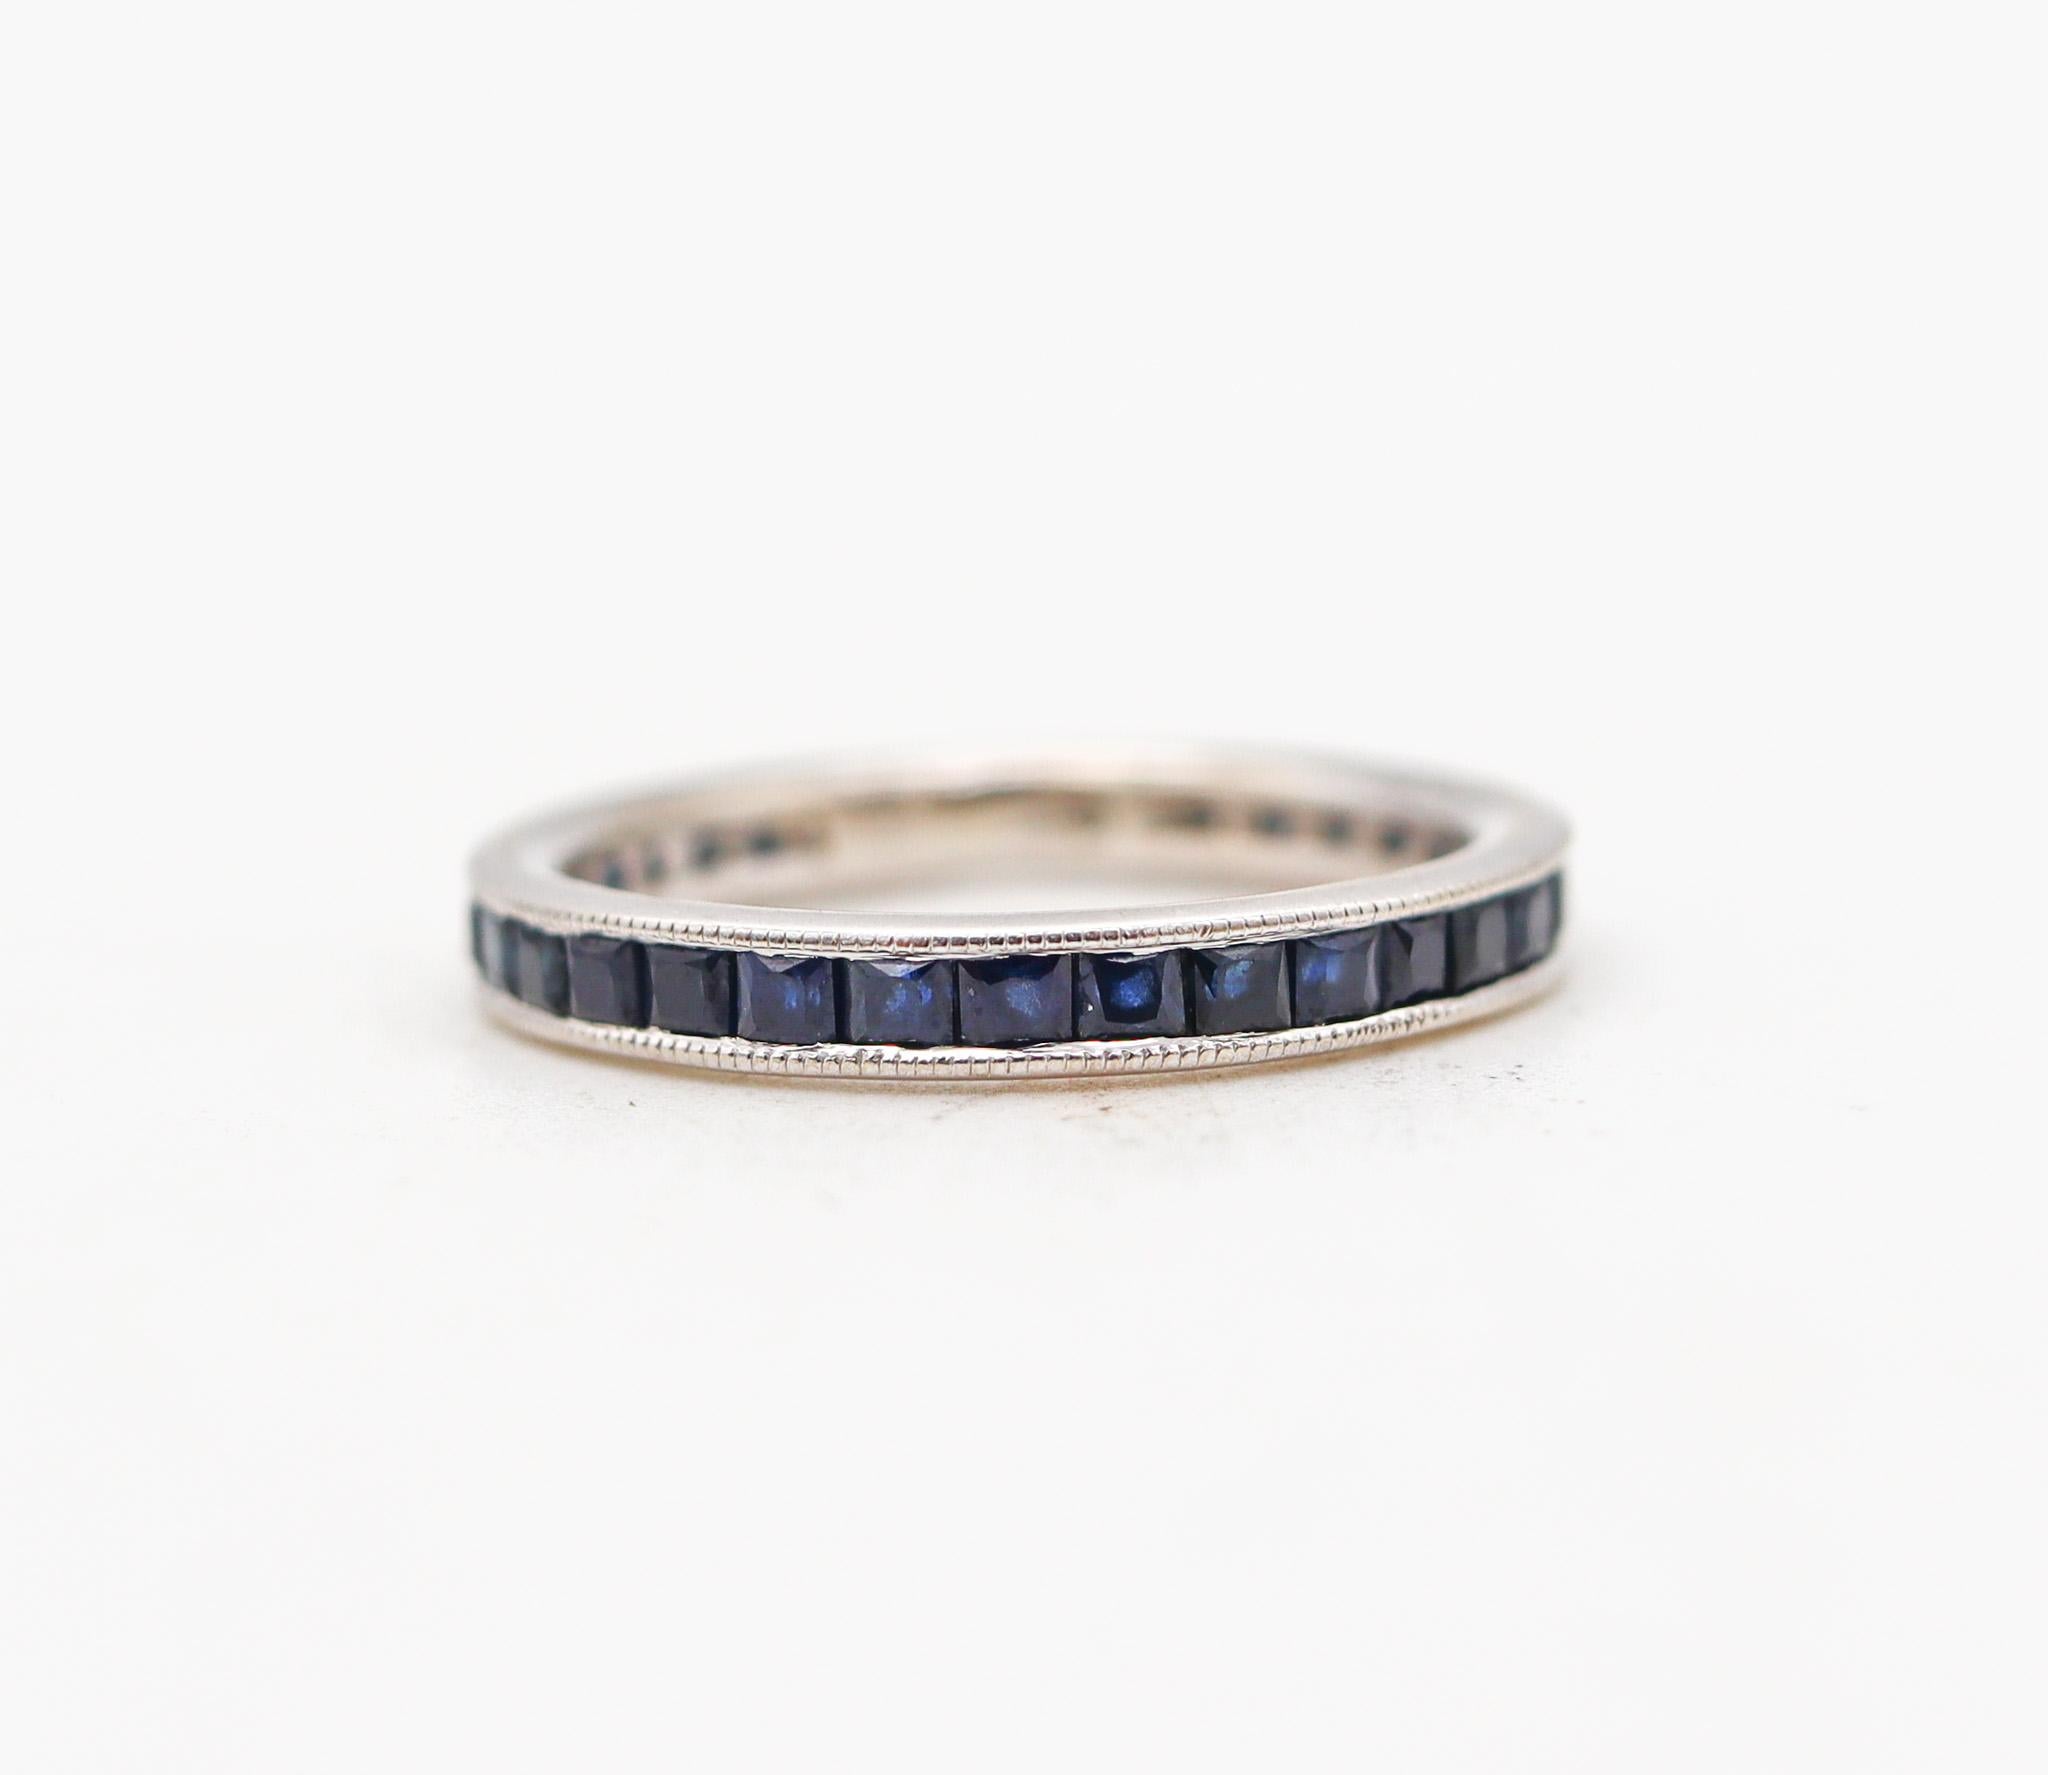 Eternity Band Ring in 14 Karat White Gold with 3.45 Ct of Natural Blue Sapphires In Excellent Condition For Sale In Miami, FL